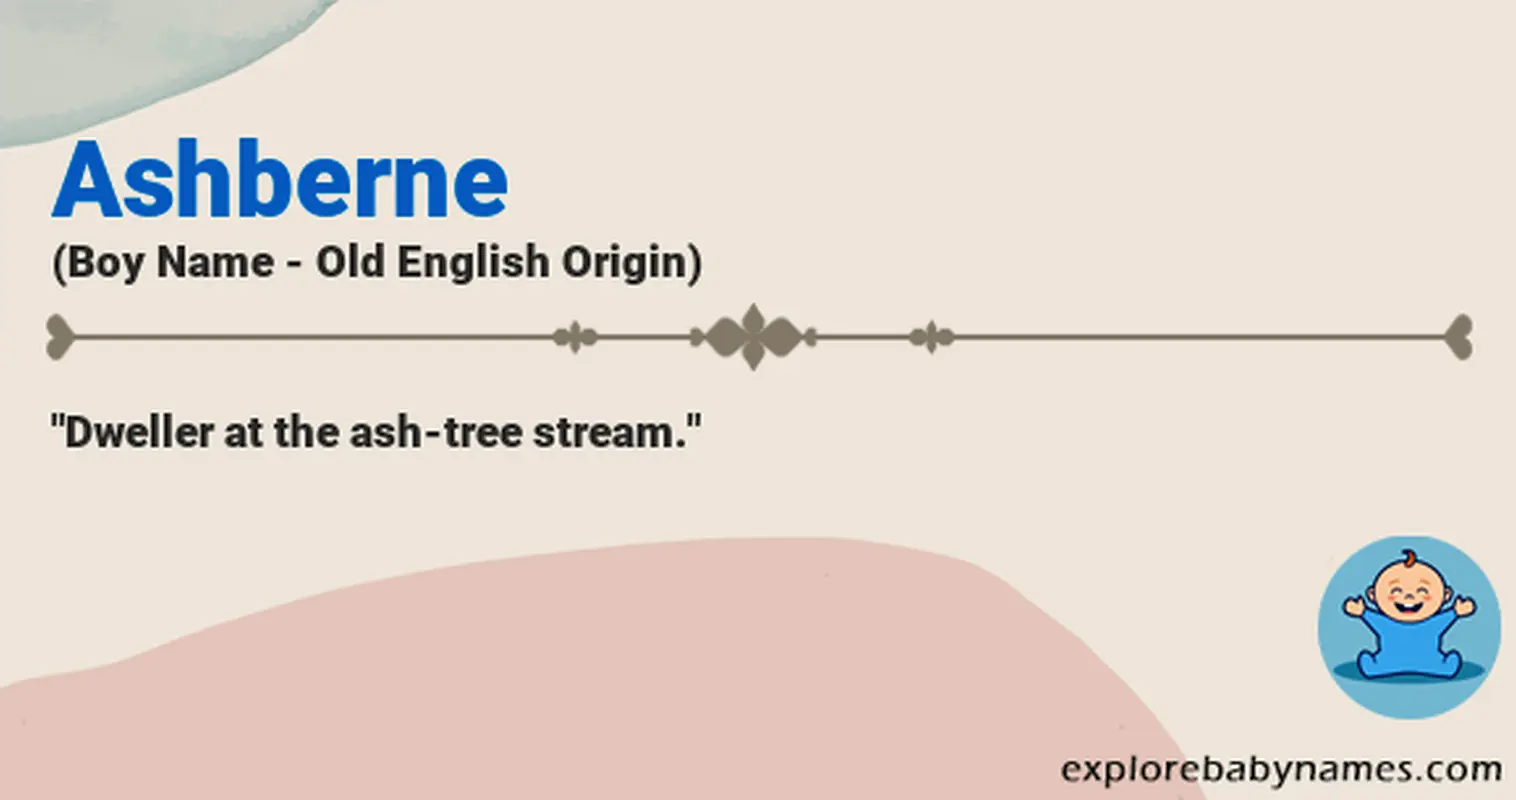 Meaning of Ashberne